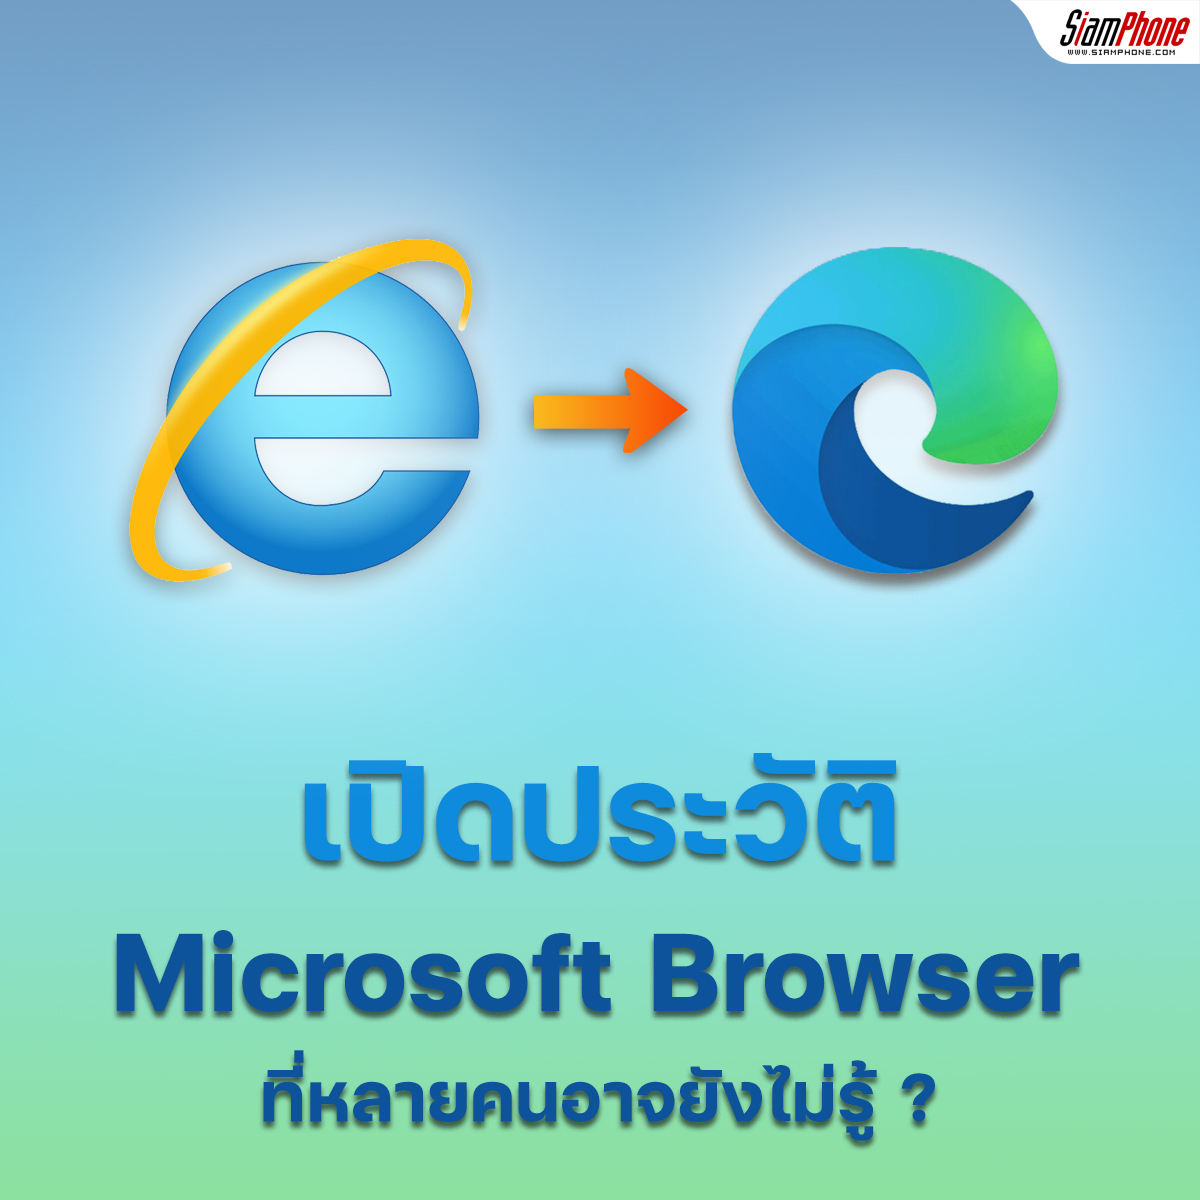 Open the history of web browsers from Microsoft that many people may not know – Siamphone.com